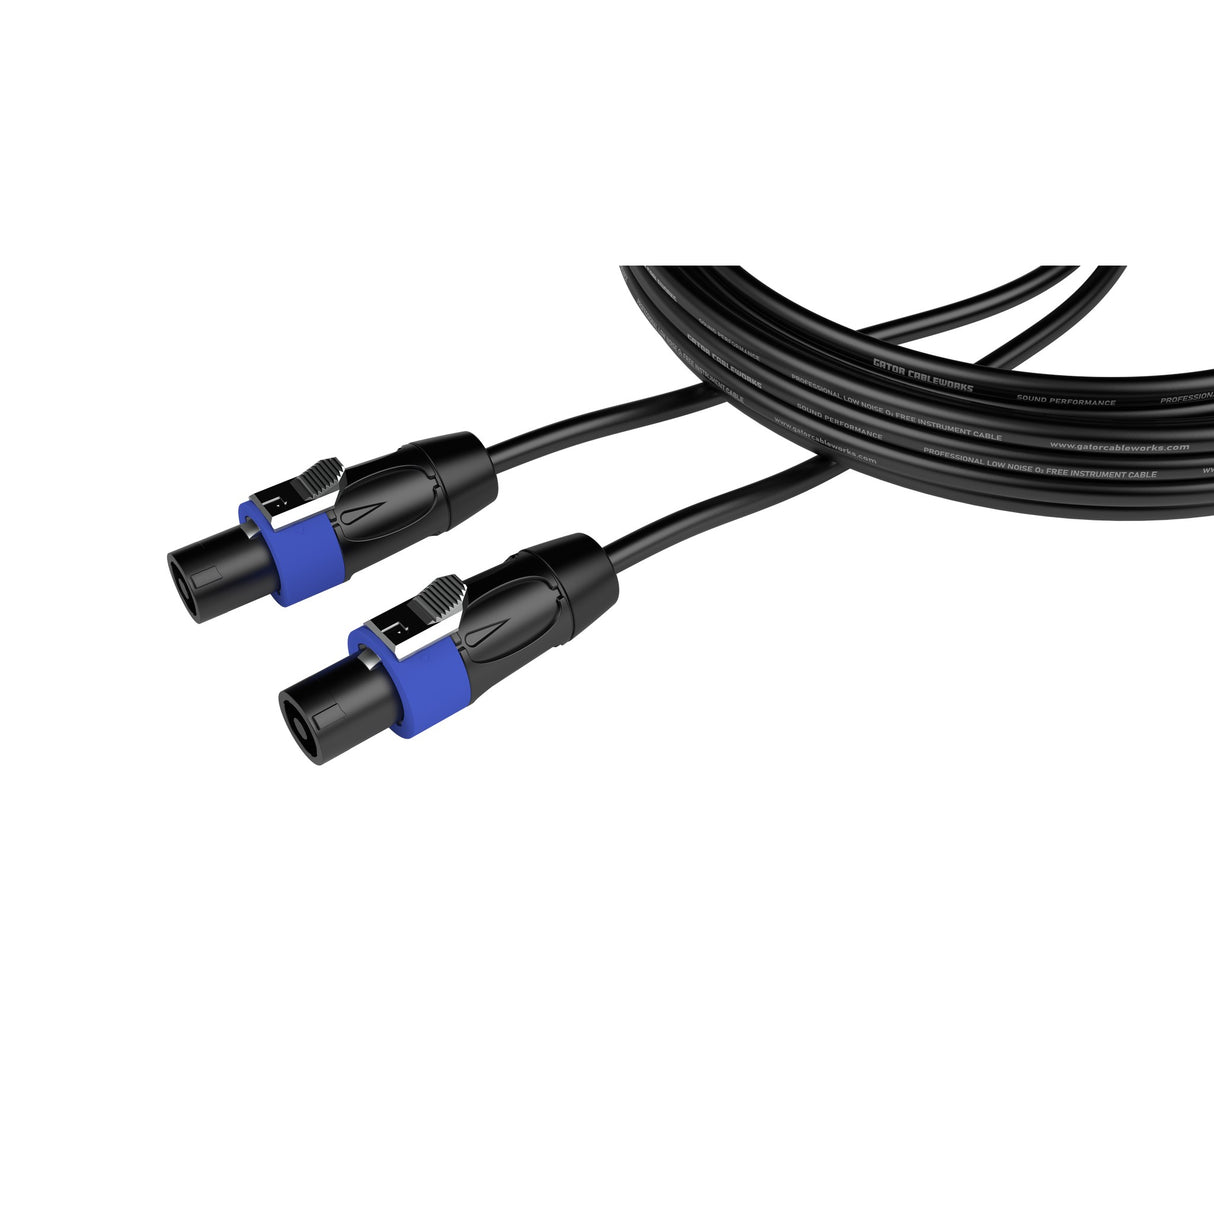 Gator CBW-CPSRSPKR2TWLK-CBLE-50 Composer Series Twist Lock Connector to Twist Lock Connector Speaker Cable, 50-Foot